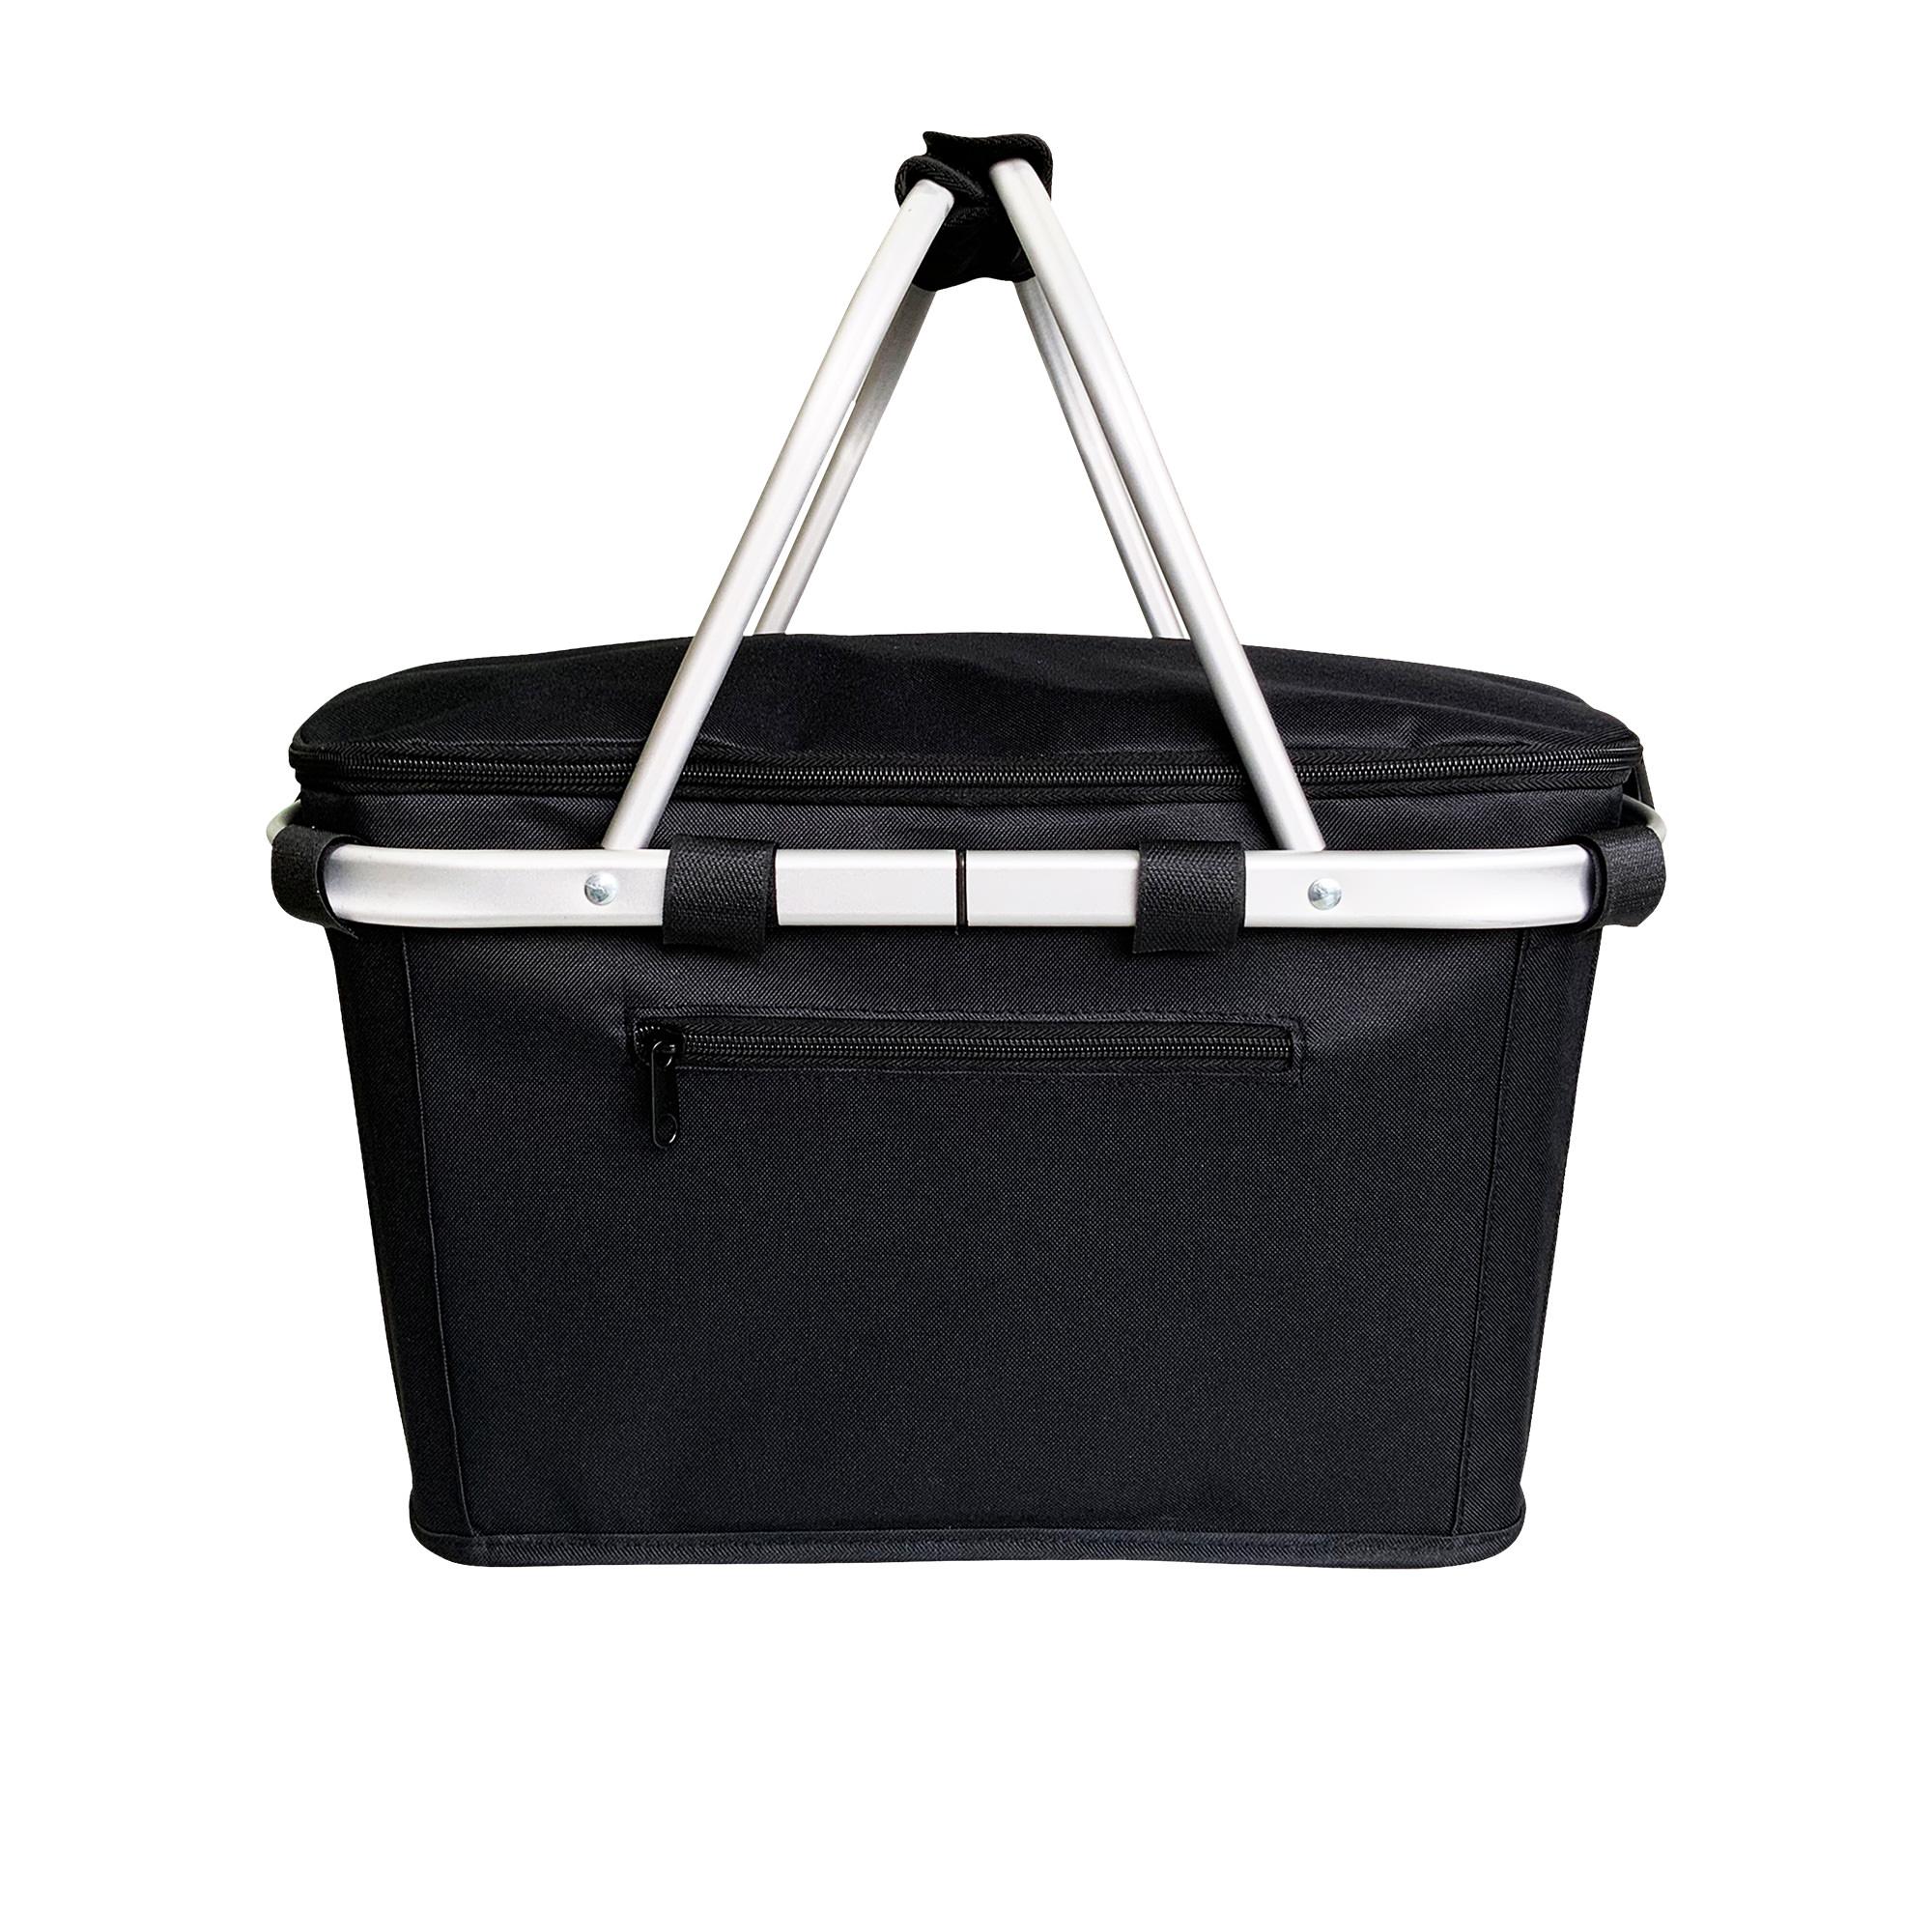 Sachi Insulated Carry Basket with Lid Black Image 2